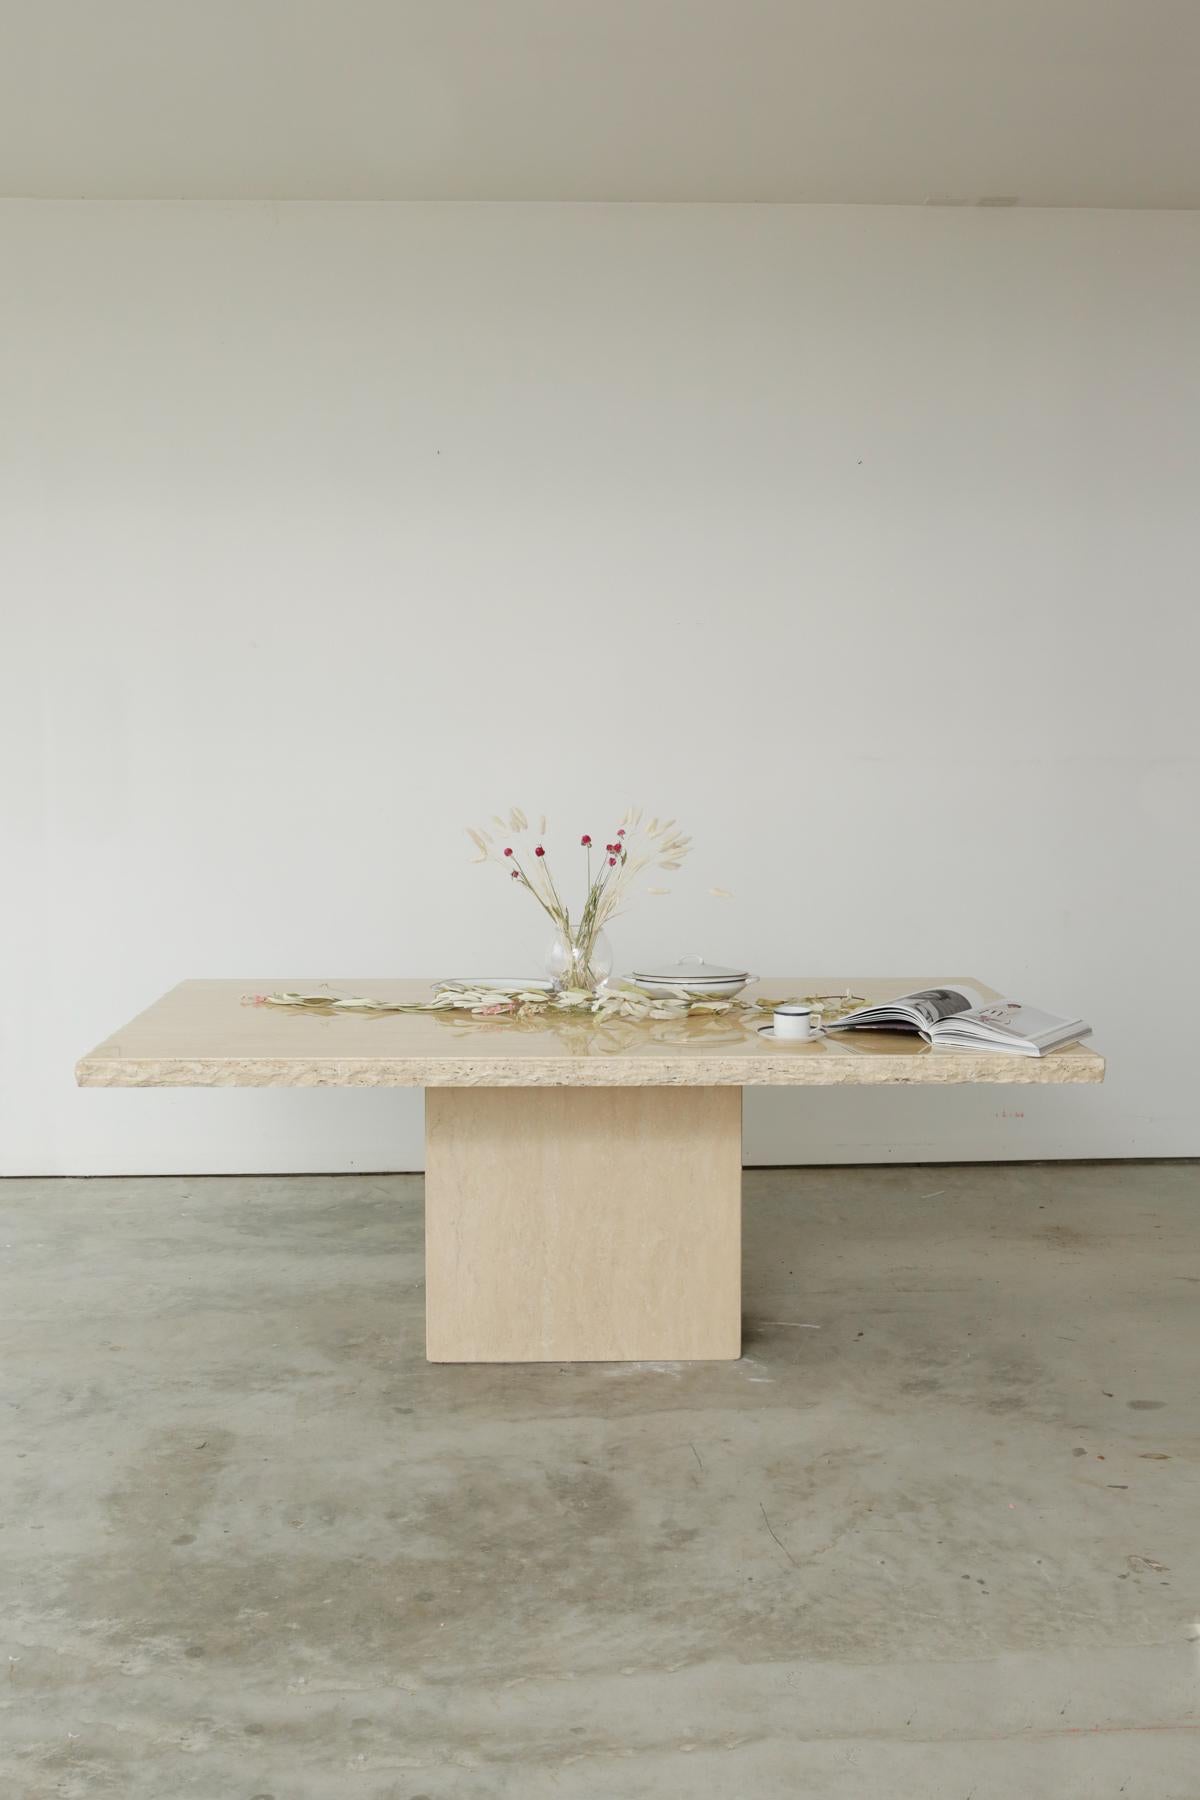 Mid-Century Modern Italian travertine live edge dining table is one of the grandest, yet subtle dining tables you can find. It has a beautiful live edge which brings the best beauty of Travertine. You can enjoy the visual satisfaction that comes